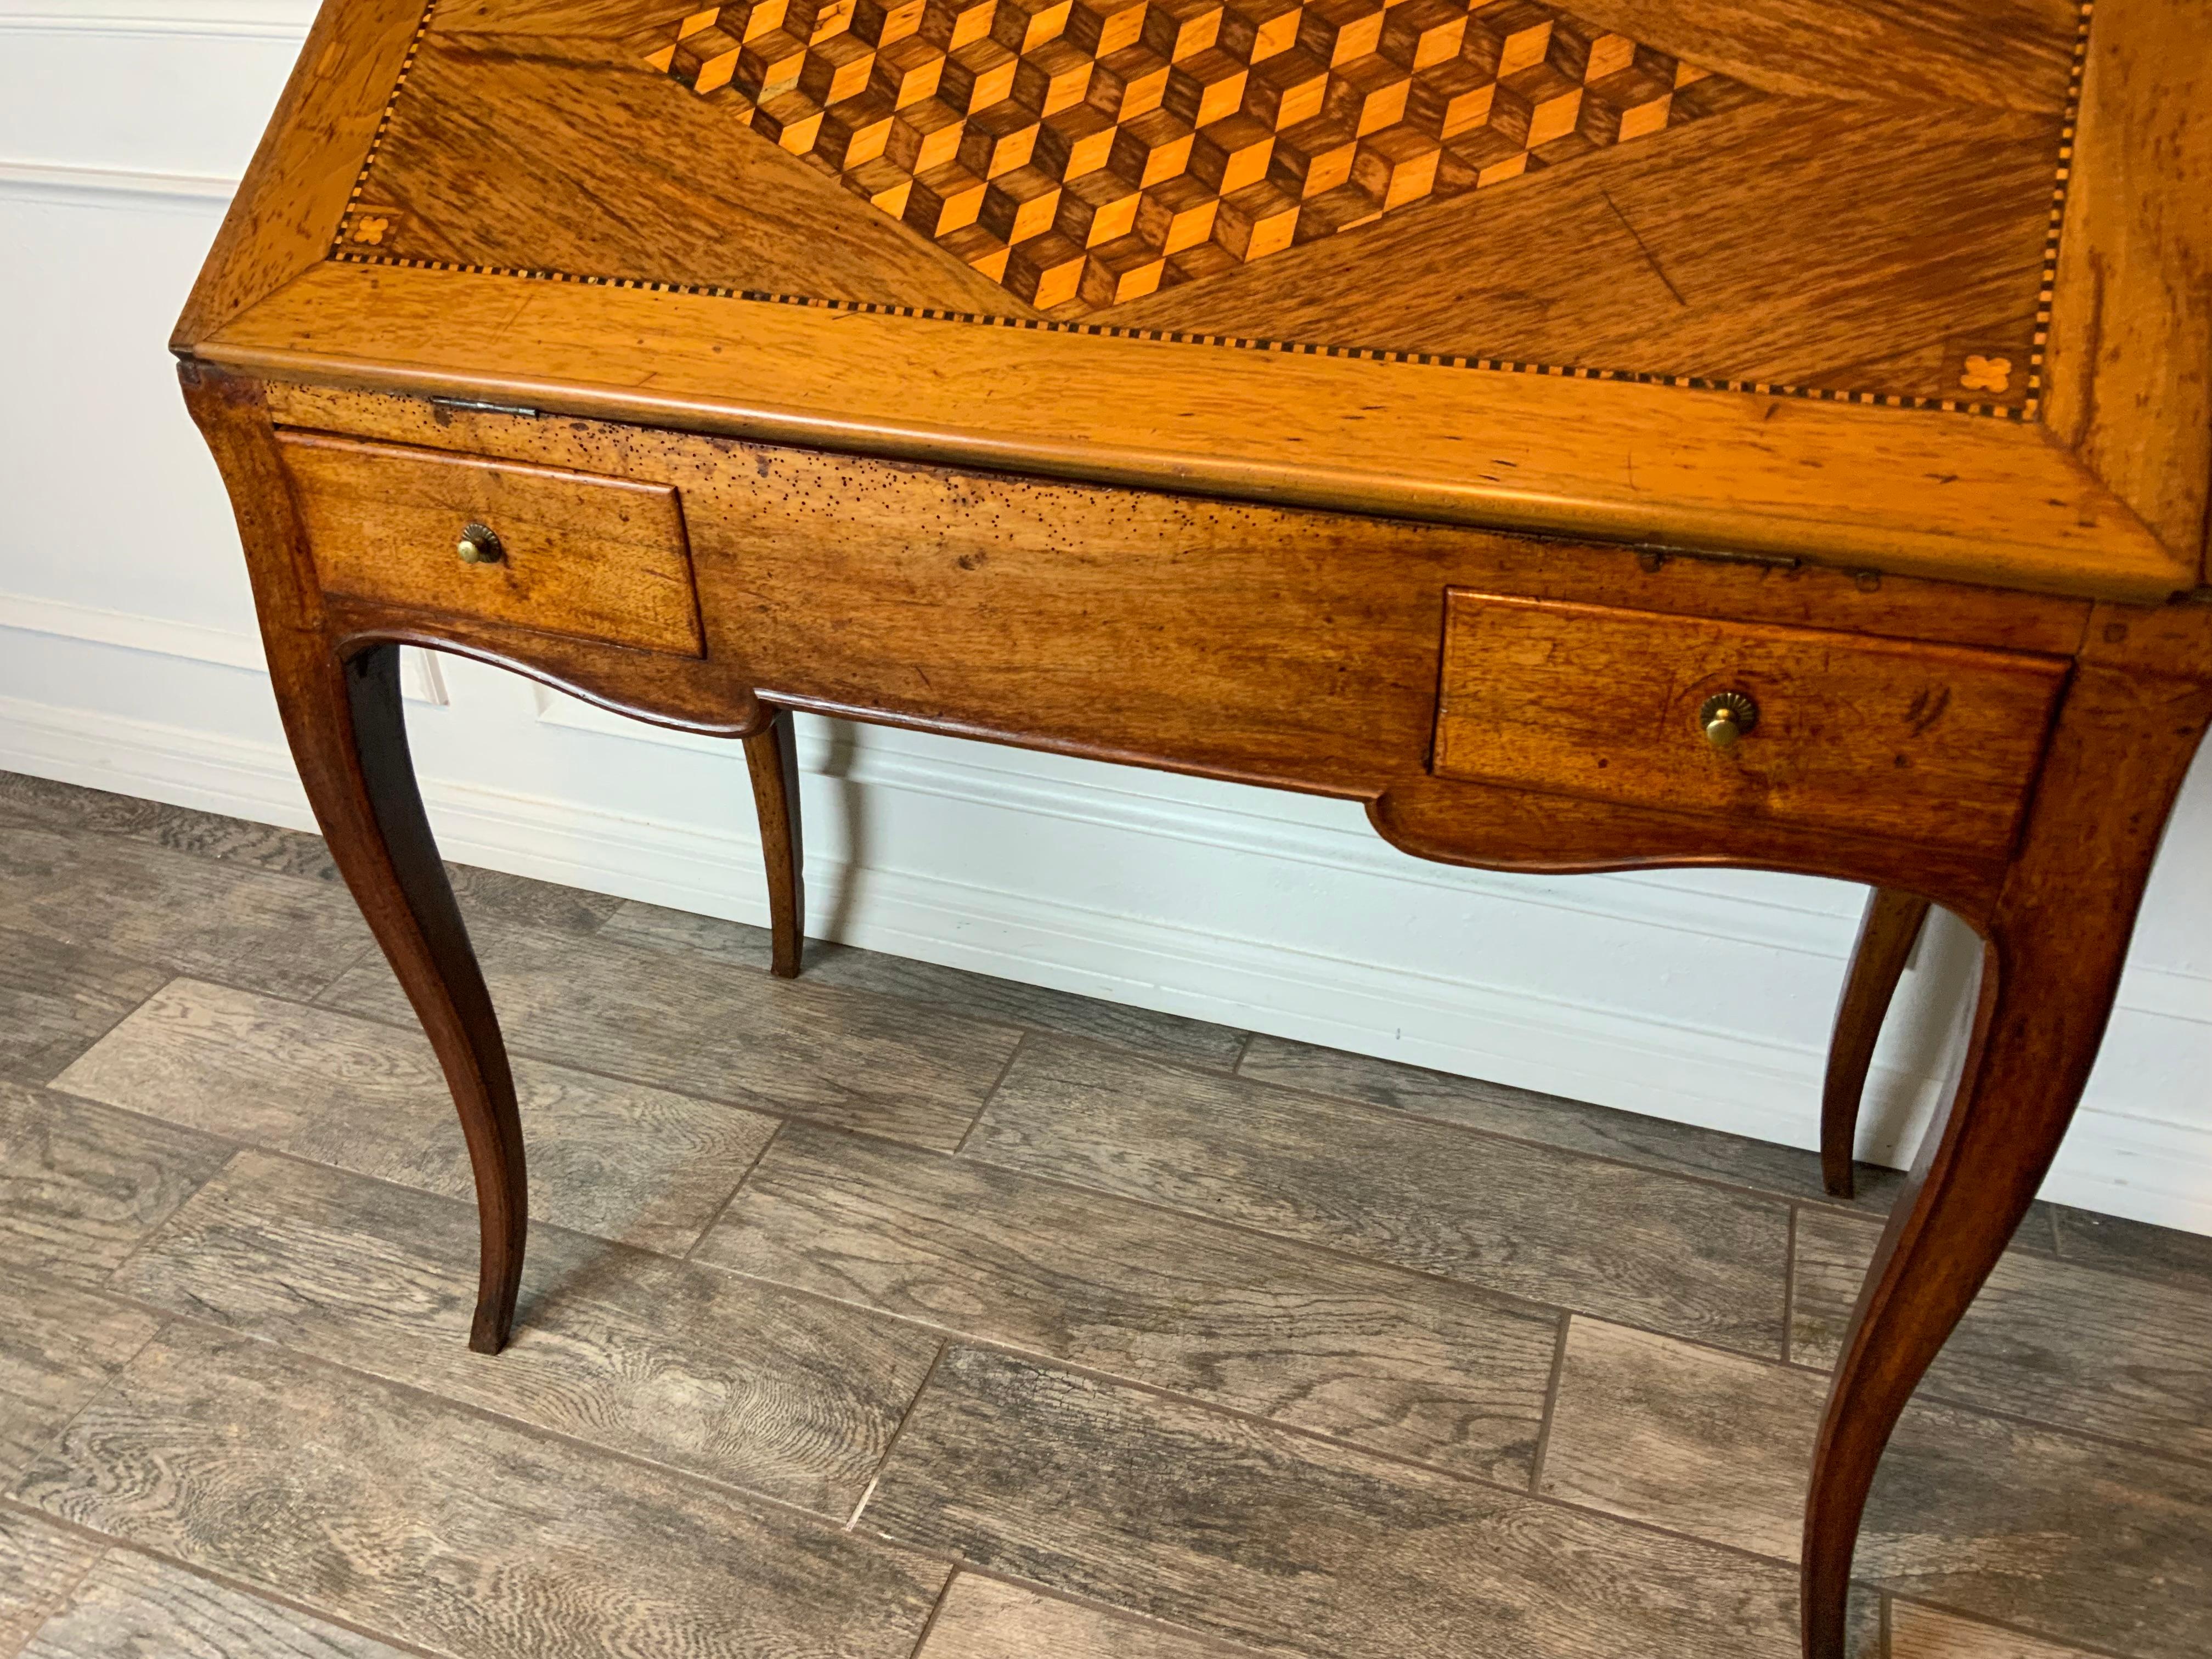 A very attractive late 18th century French Walnut slant front desk with geometric marquetry design on the lid.  Gold tooled leather writing surface on the inside of the lid over two drawers on the cut out apron.  One drawer on the inside reveals a